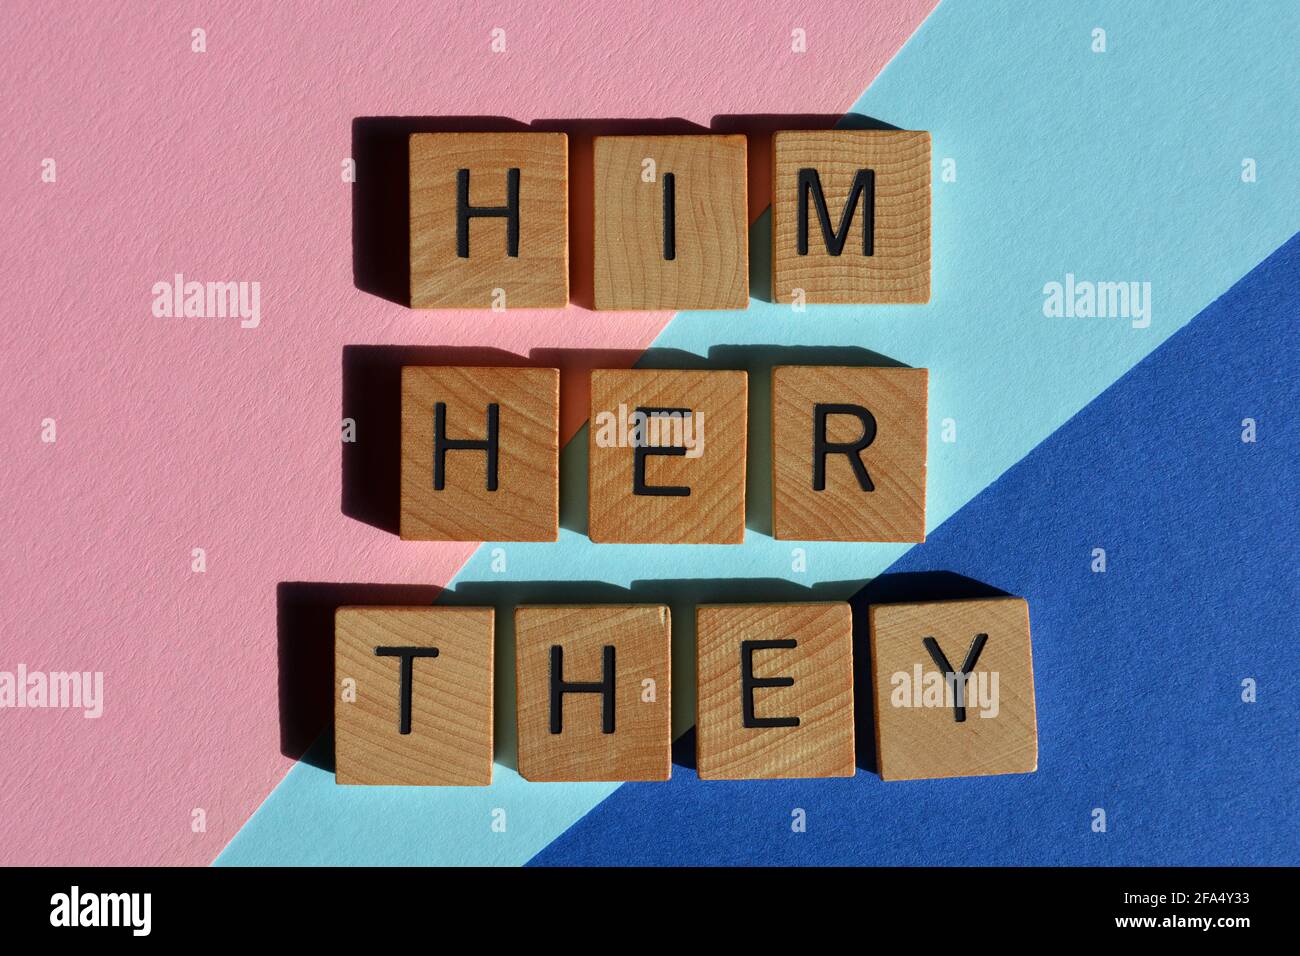 Him, Her, They, gender pronouns on pink and blue background Stock Photo